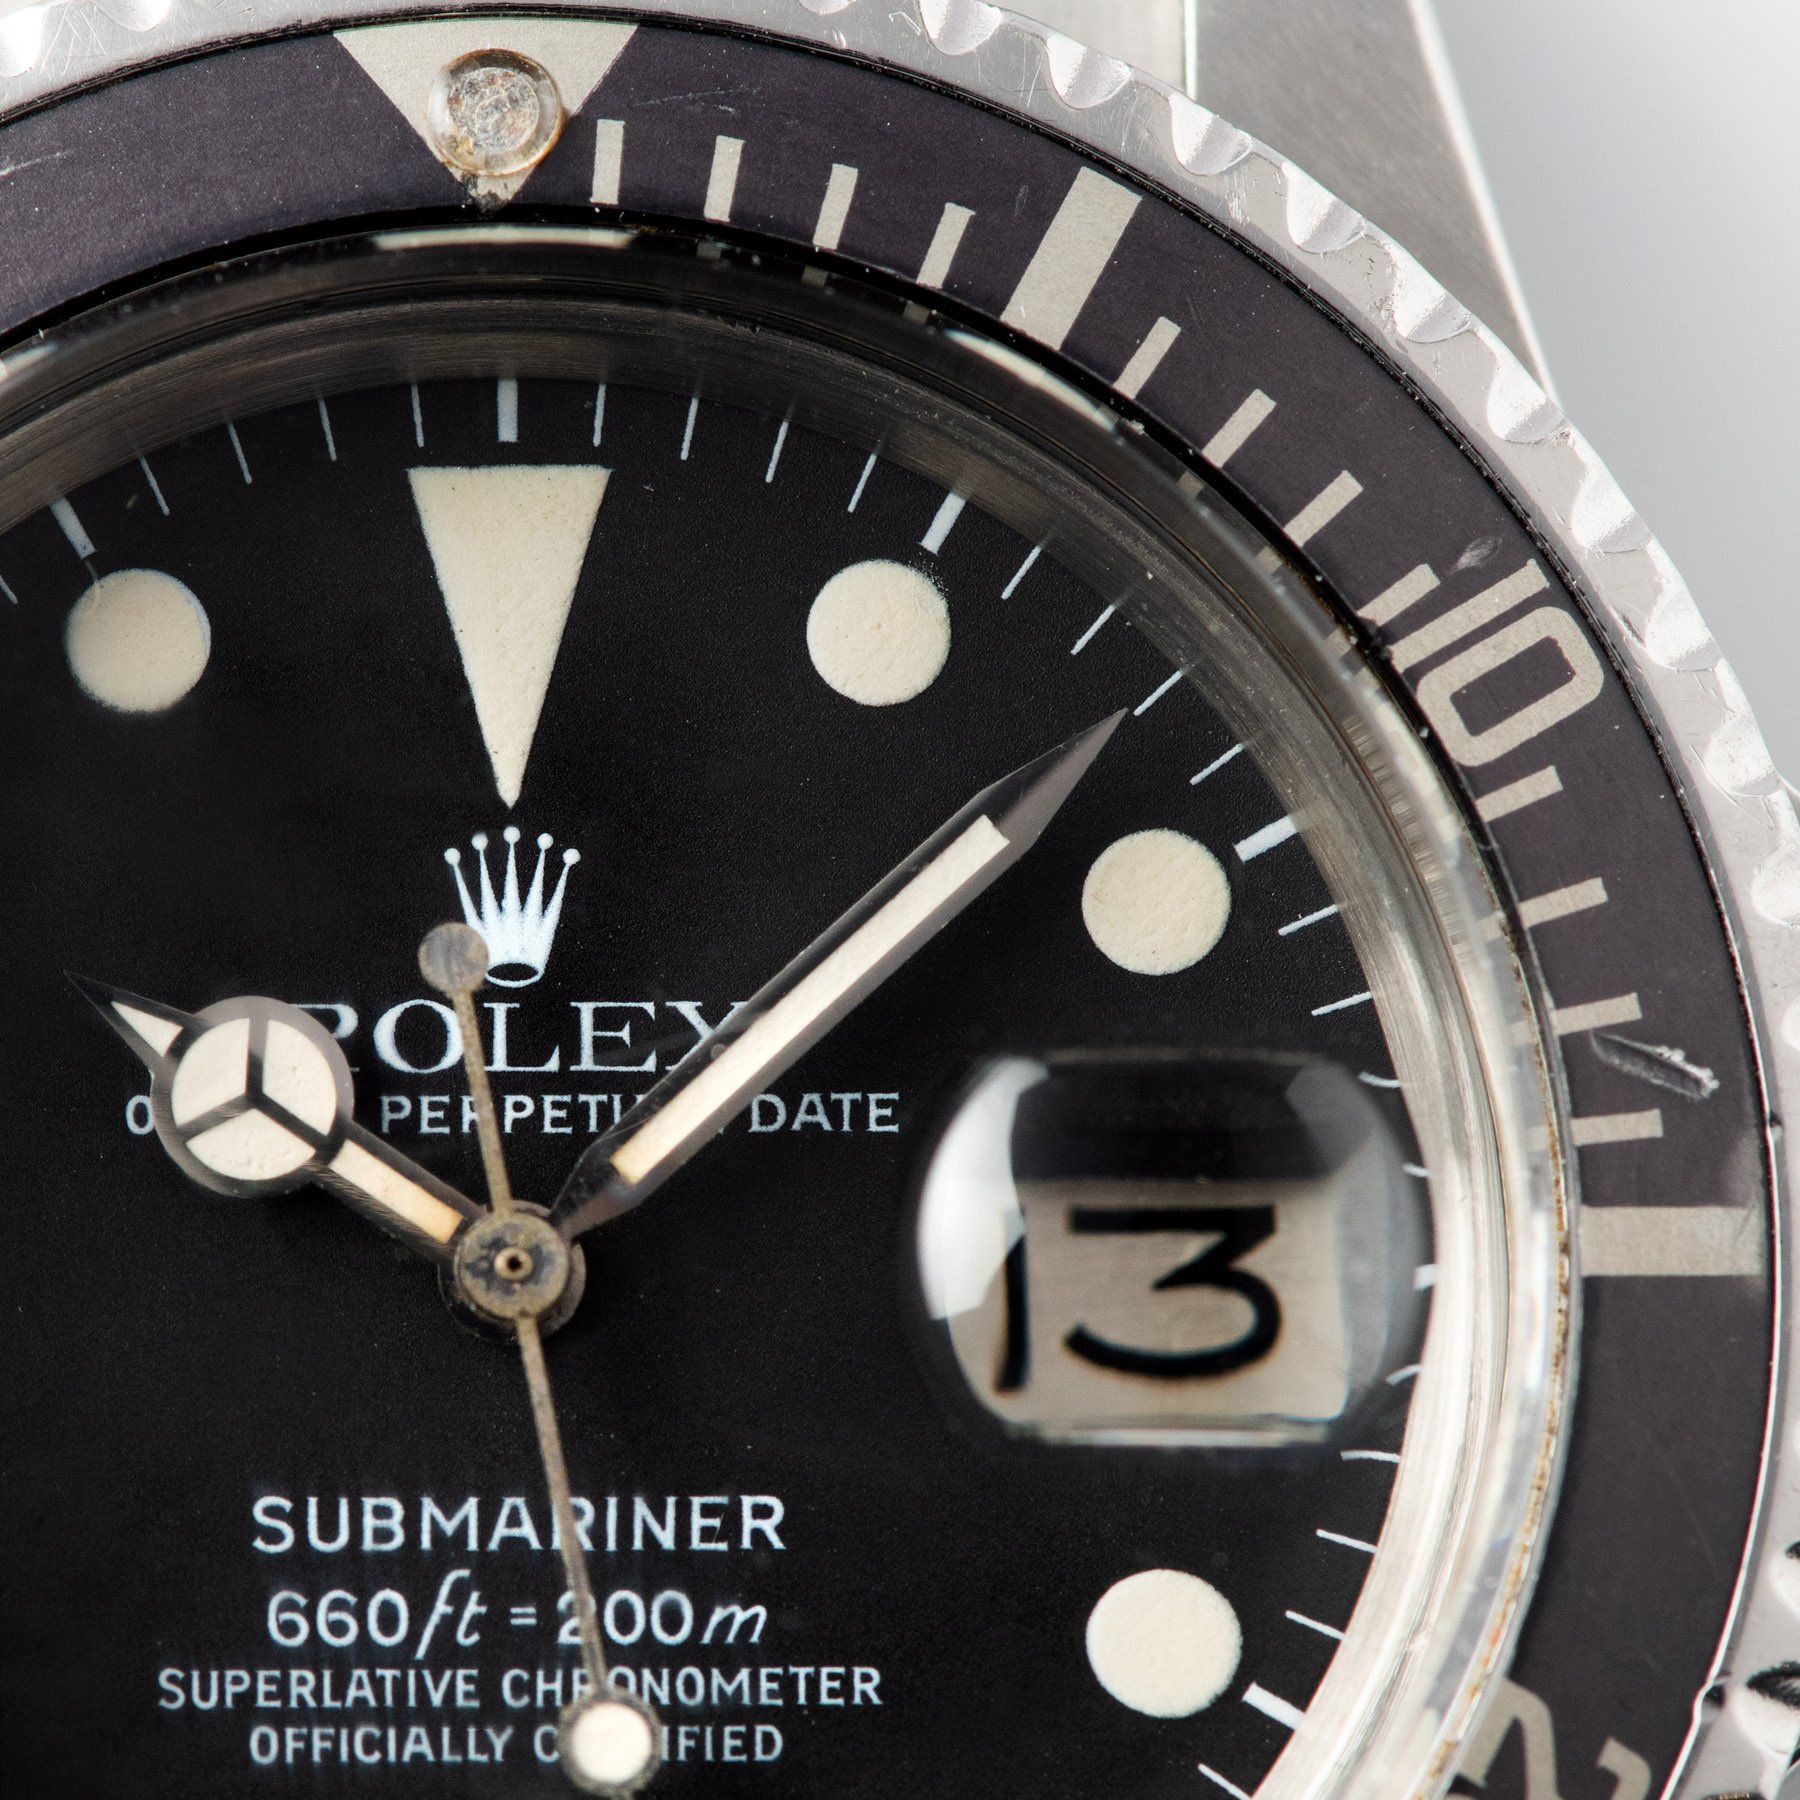 Rolex Submariner Date 1680 Mk2 Matte Dial with an aubergine shade/tropical brown inlay